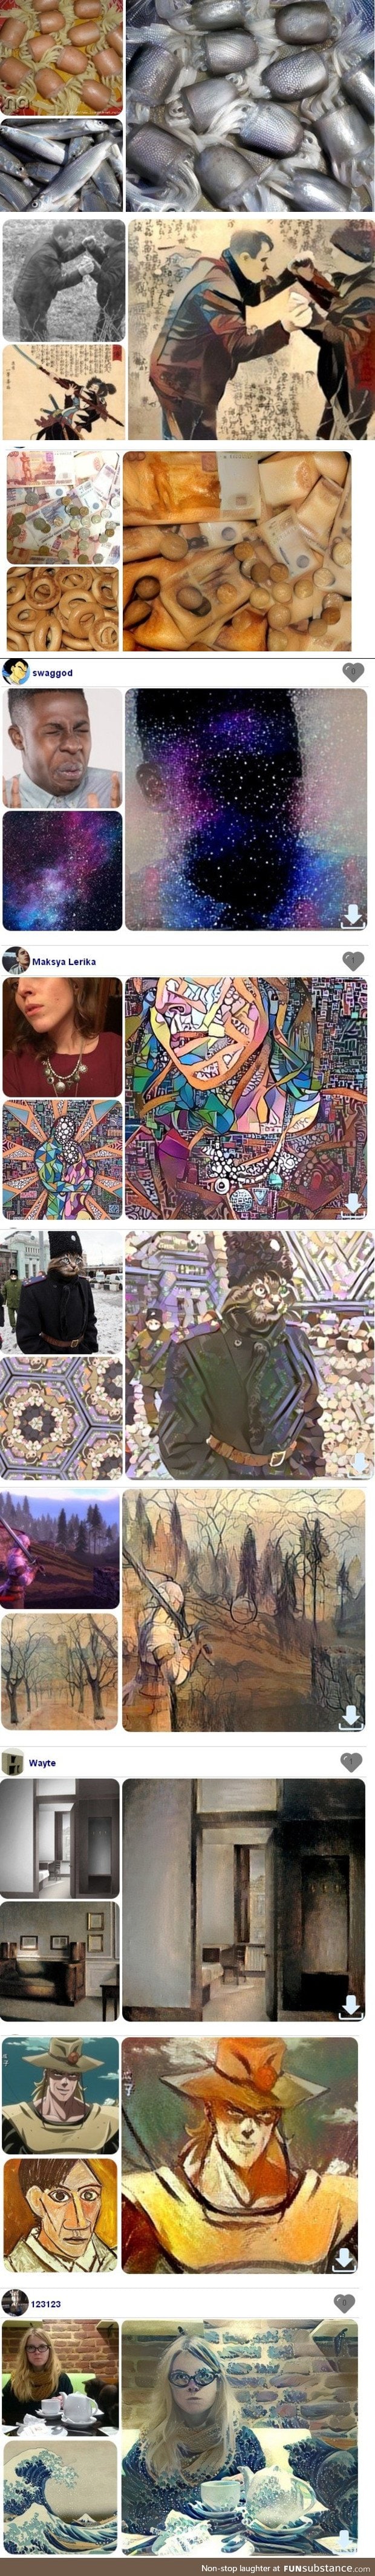 Pictures combined using Neural networks